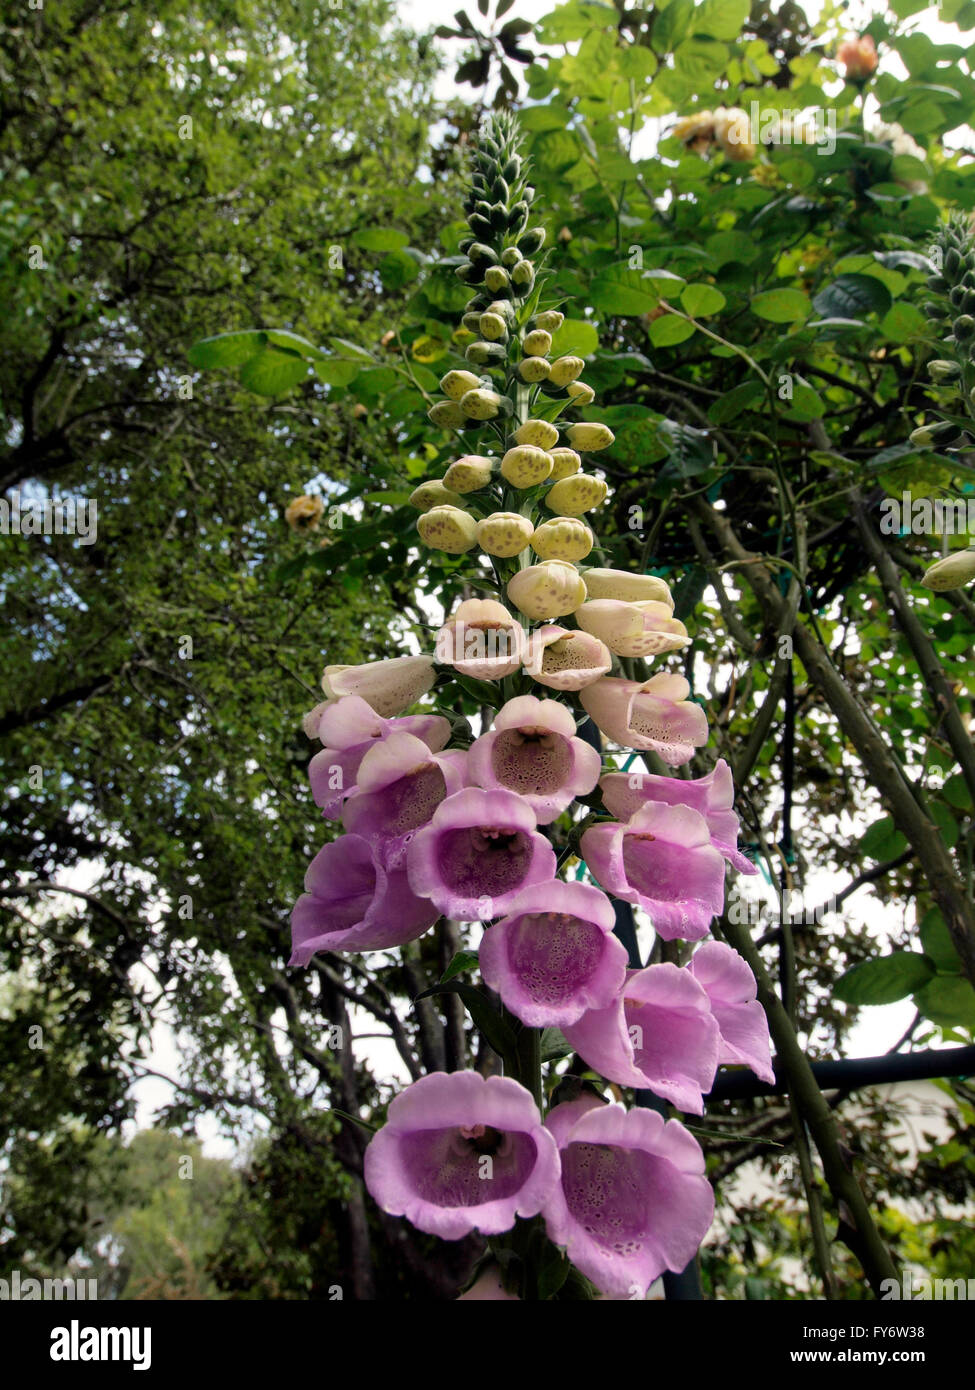 Purple Flowers bloom up long stem in Garden, unbloomed flowers yellow and green. Stock Photo